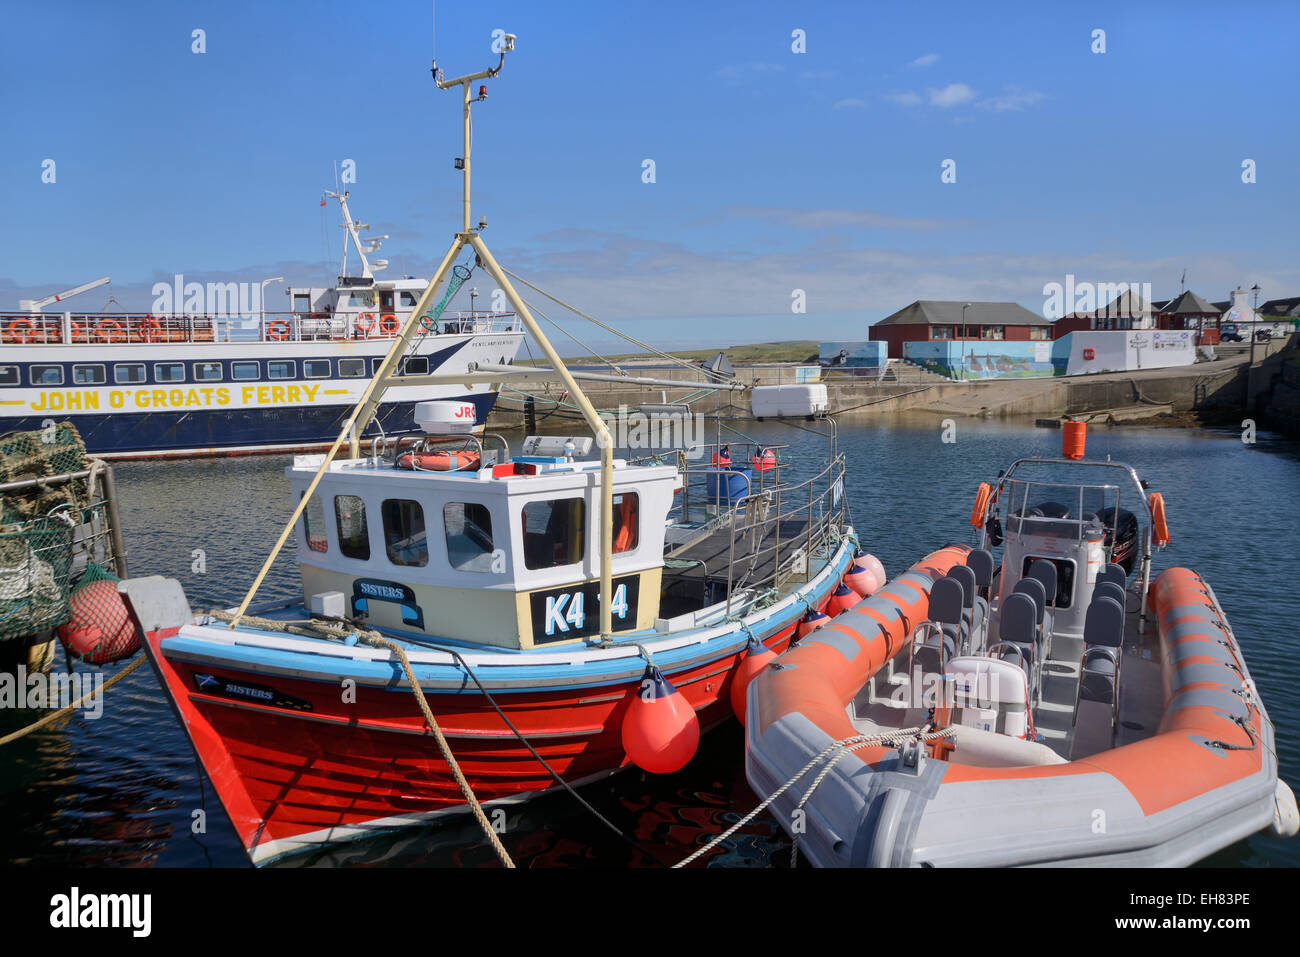 Fishing boat and rigid-inflatable boat in the harbour, John O'Groats, Caithness, Highland Region, Scotland, United Kingdom Stock Photo